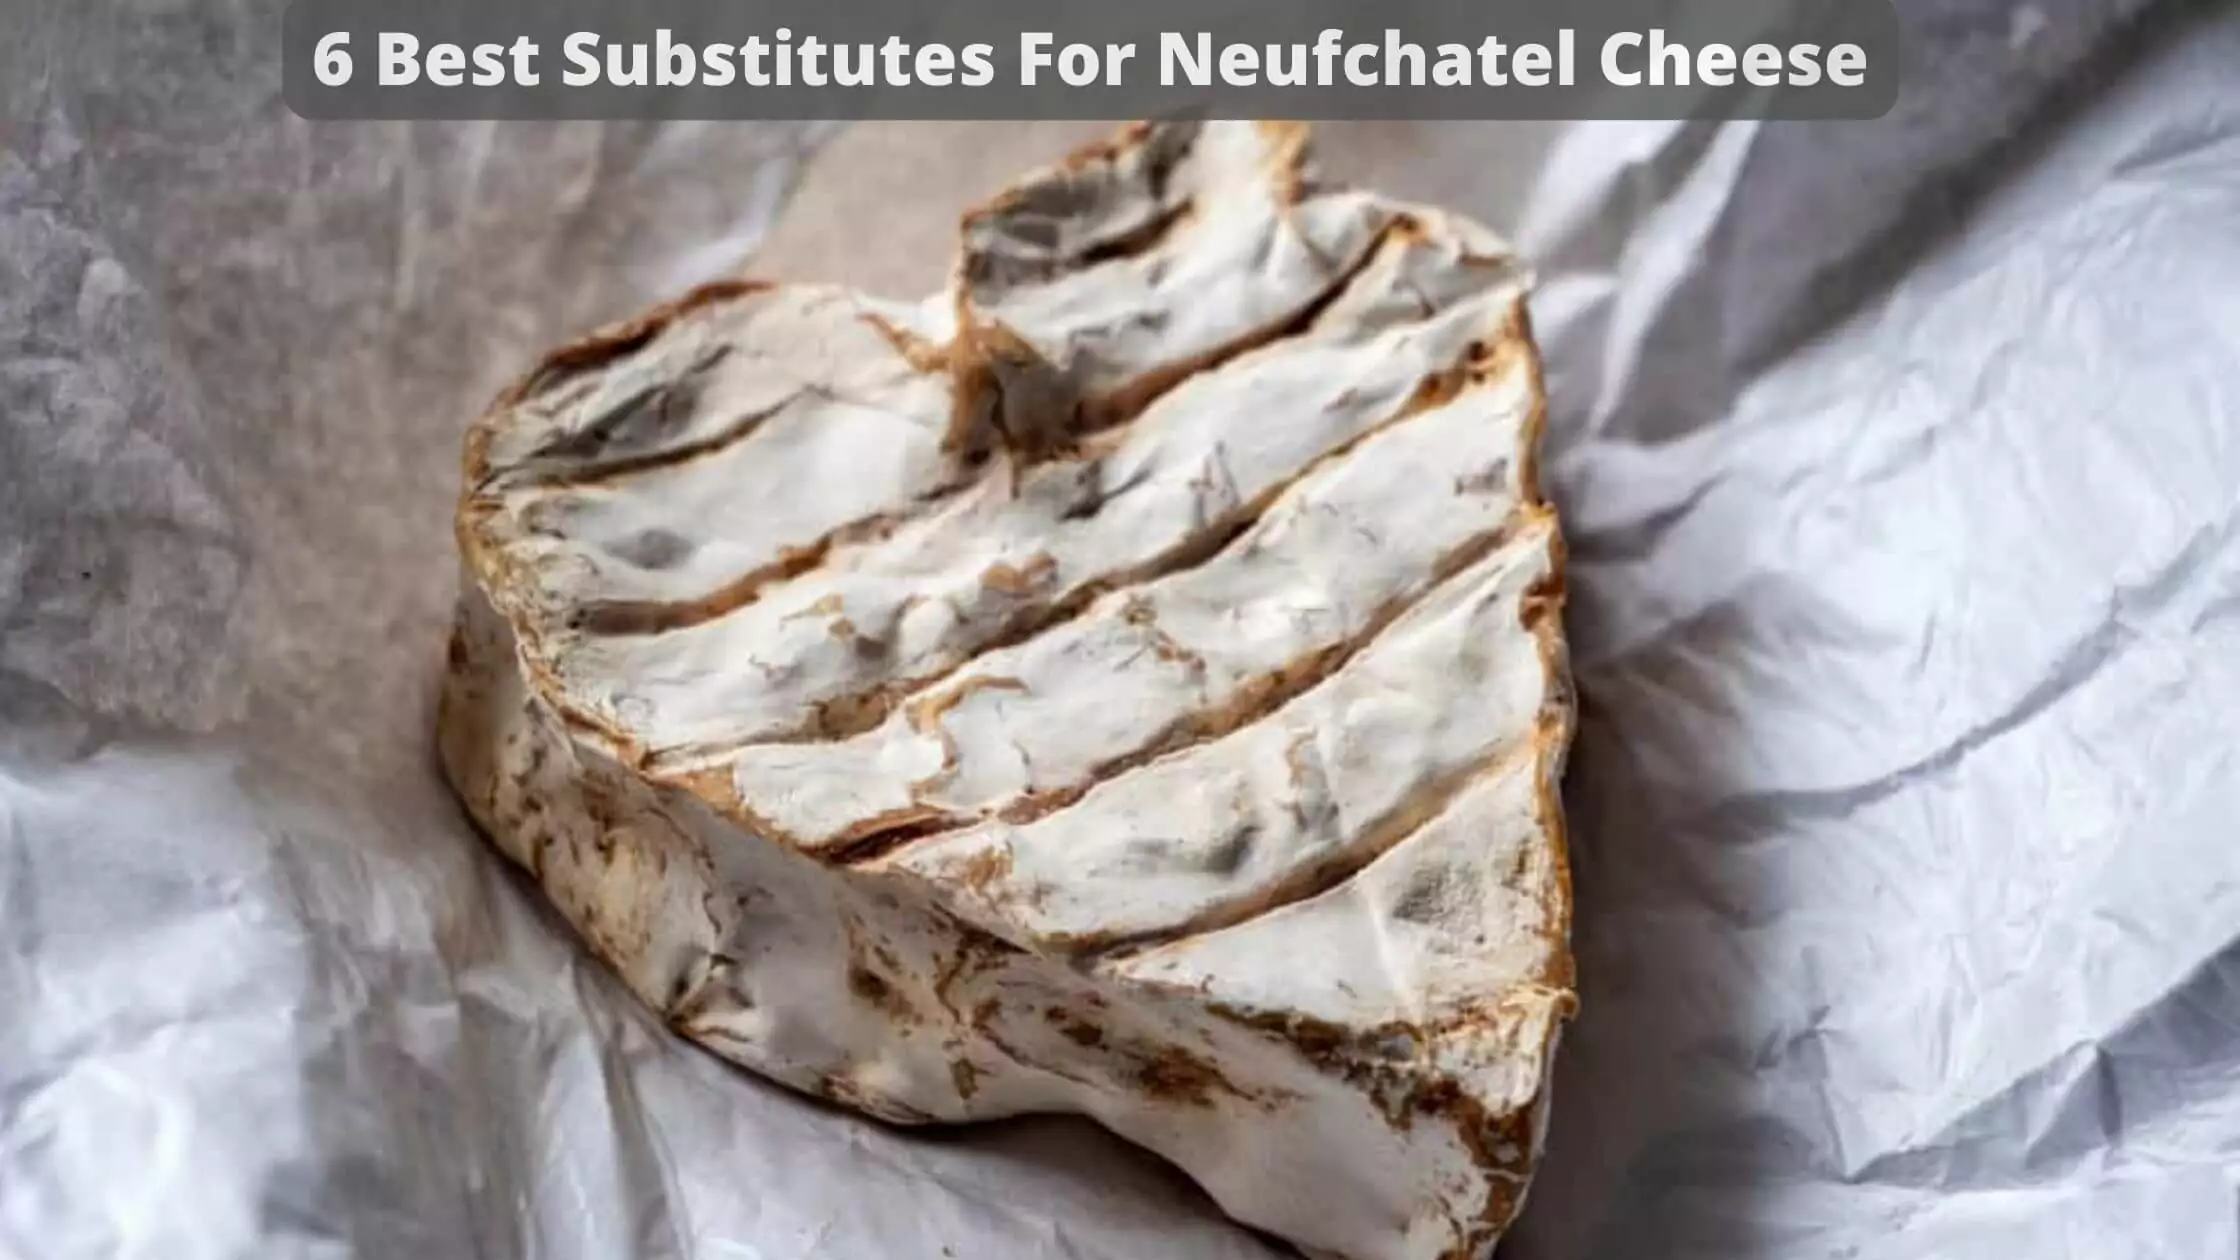 6 Best Substitutes For Neufchatel Cheese